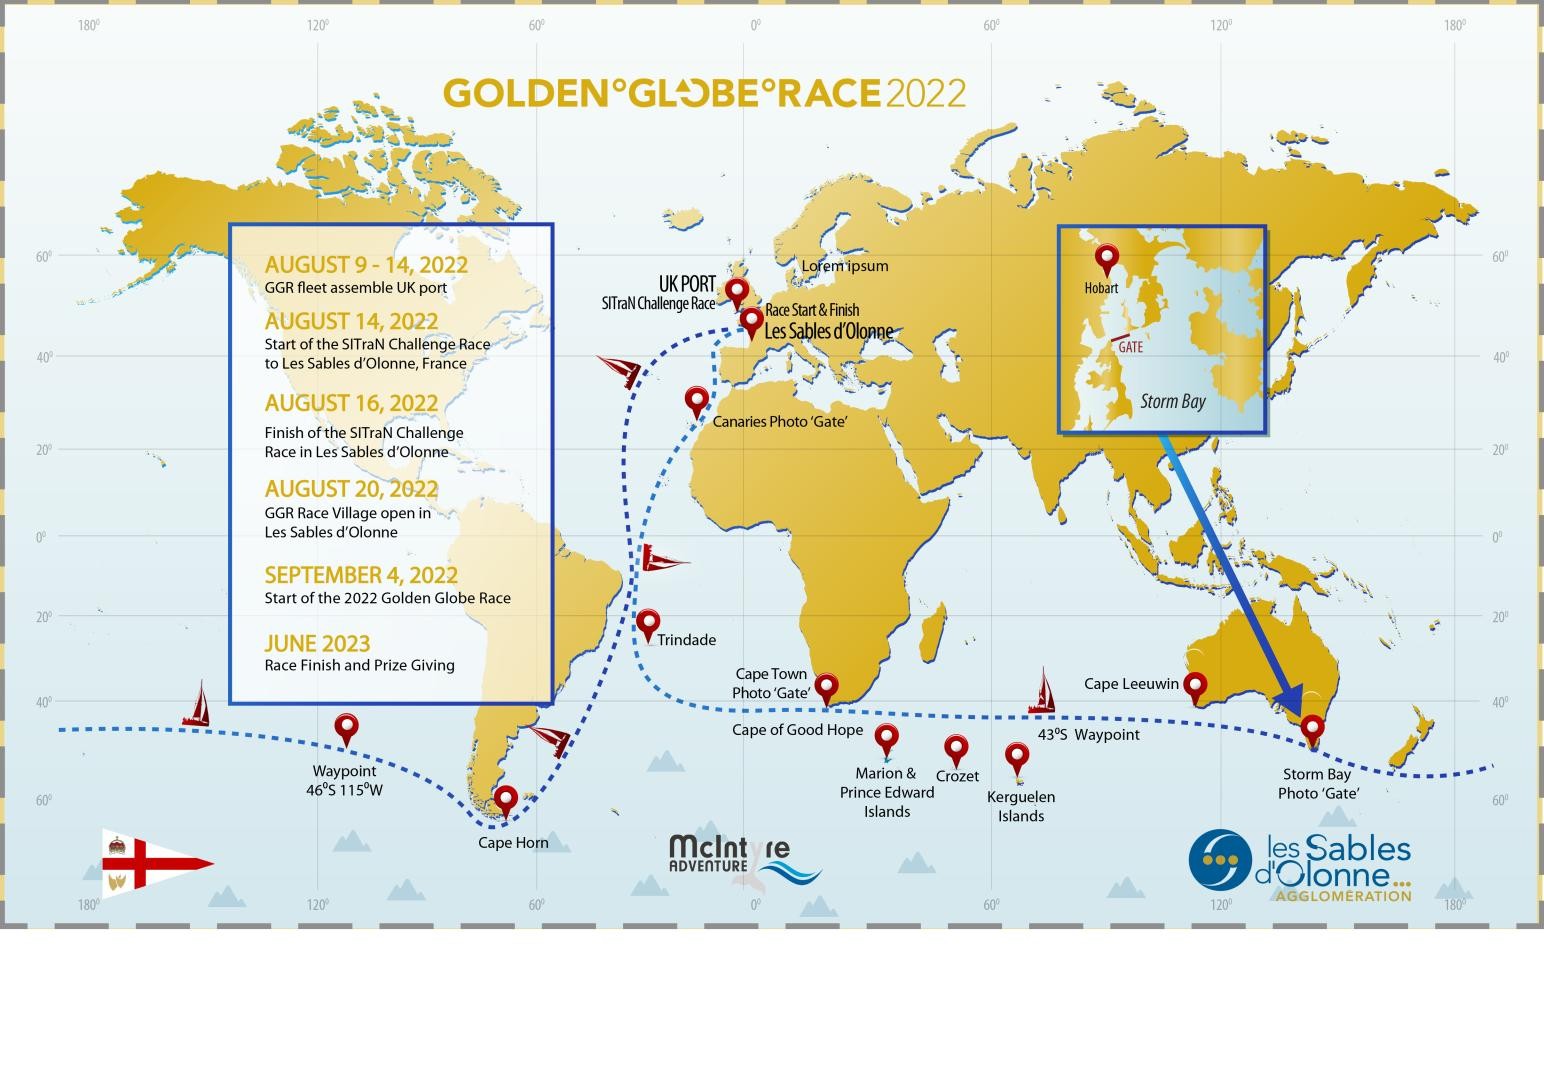 The course for the 2022 Golden Globe Race with the addition of the Island of Trindade as a turning mark, and Cape Town as a second photo gate.